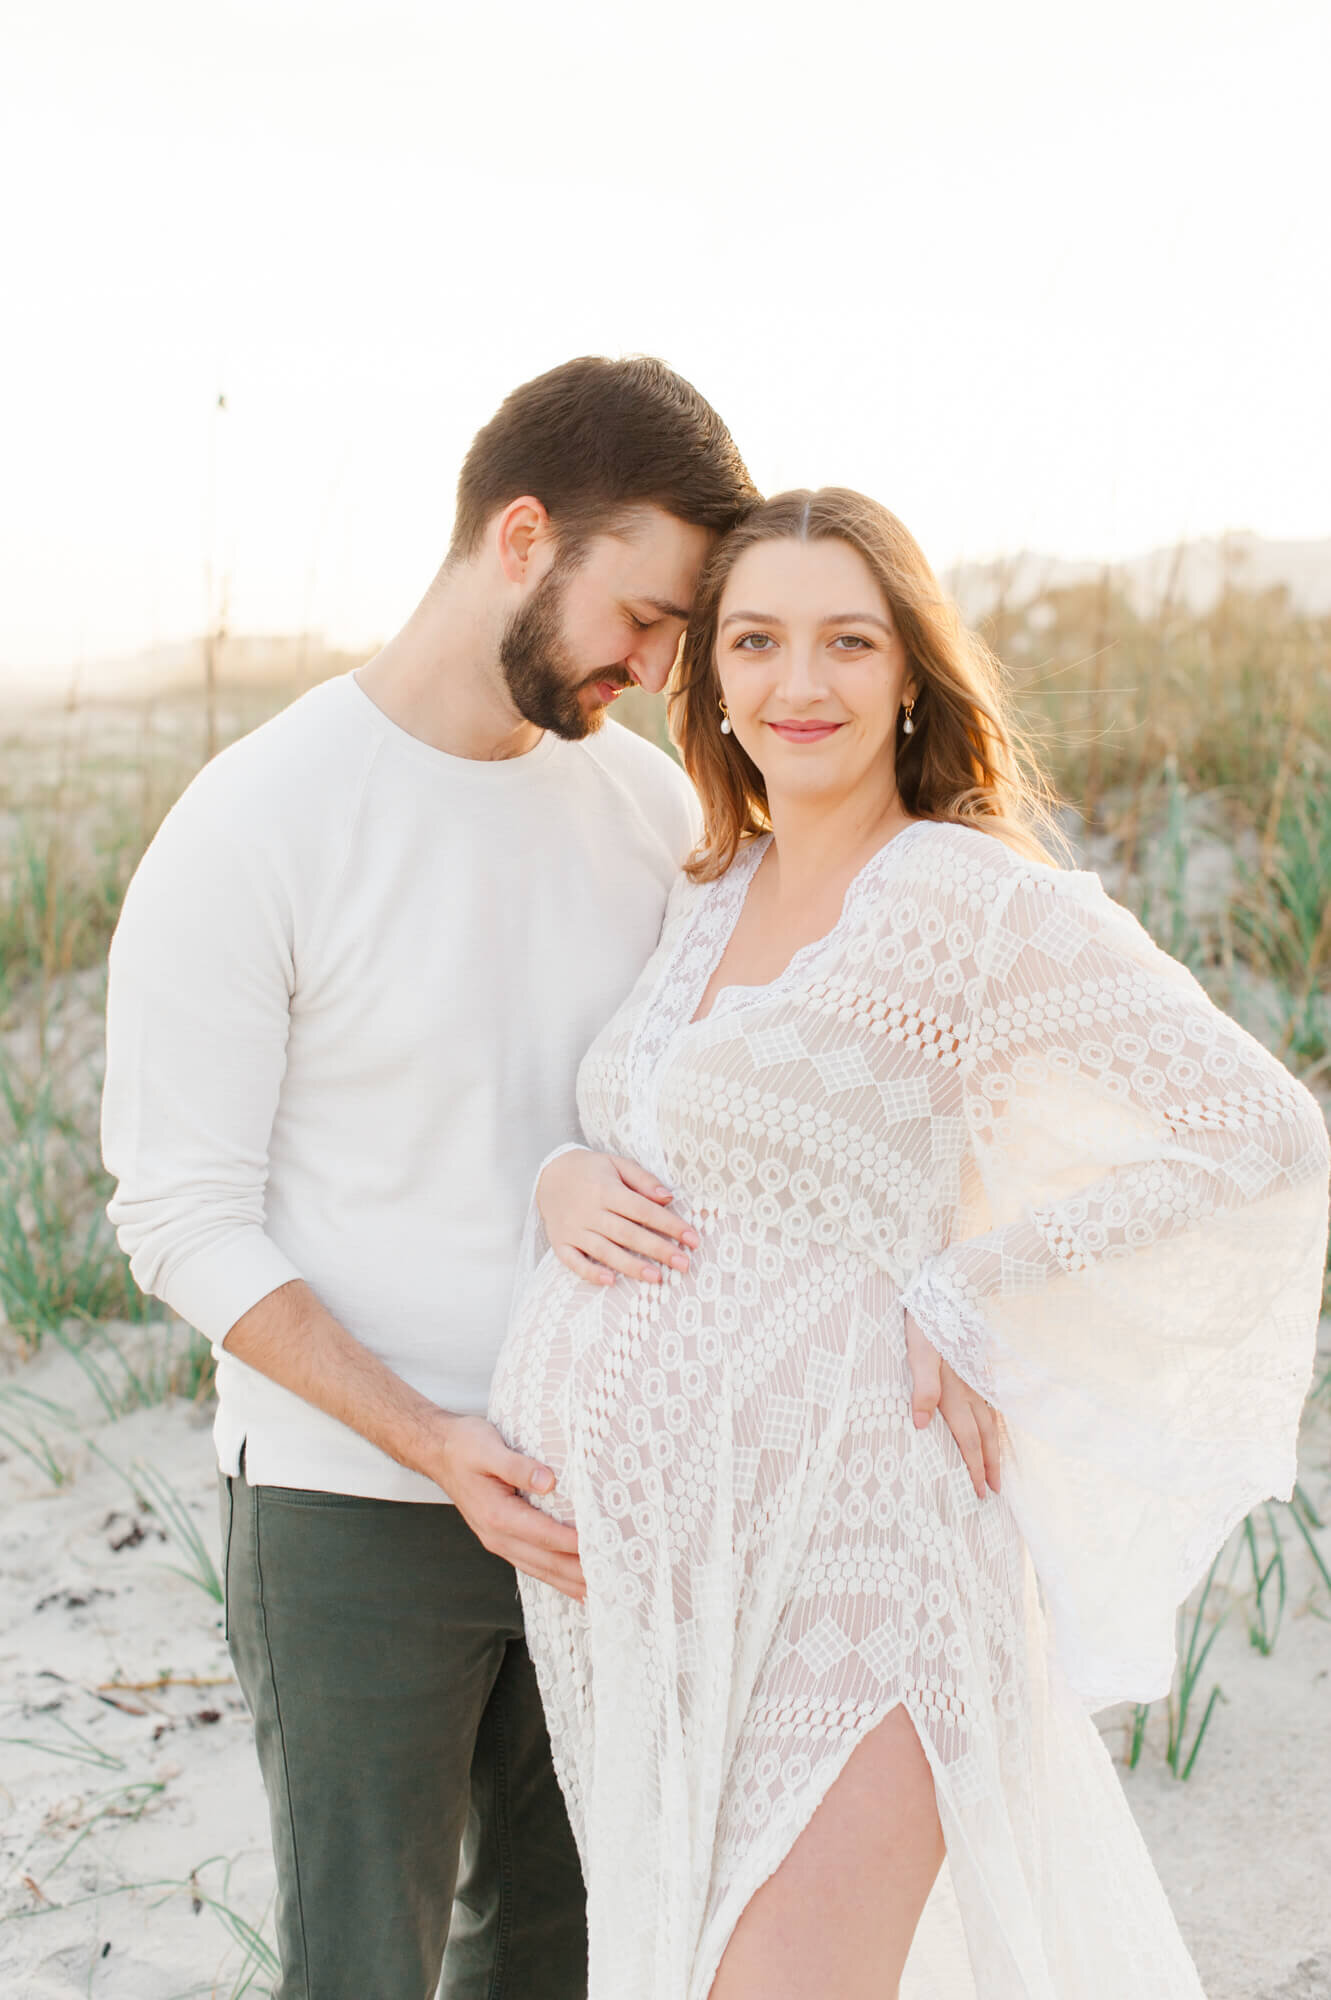 Vero Beach maternity photographer captures expectant parents holding moms belly and standing near the dunes on Vero Beach